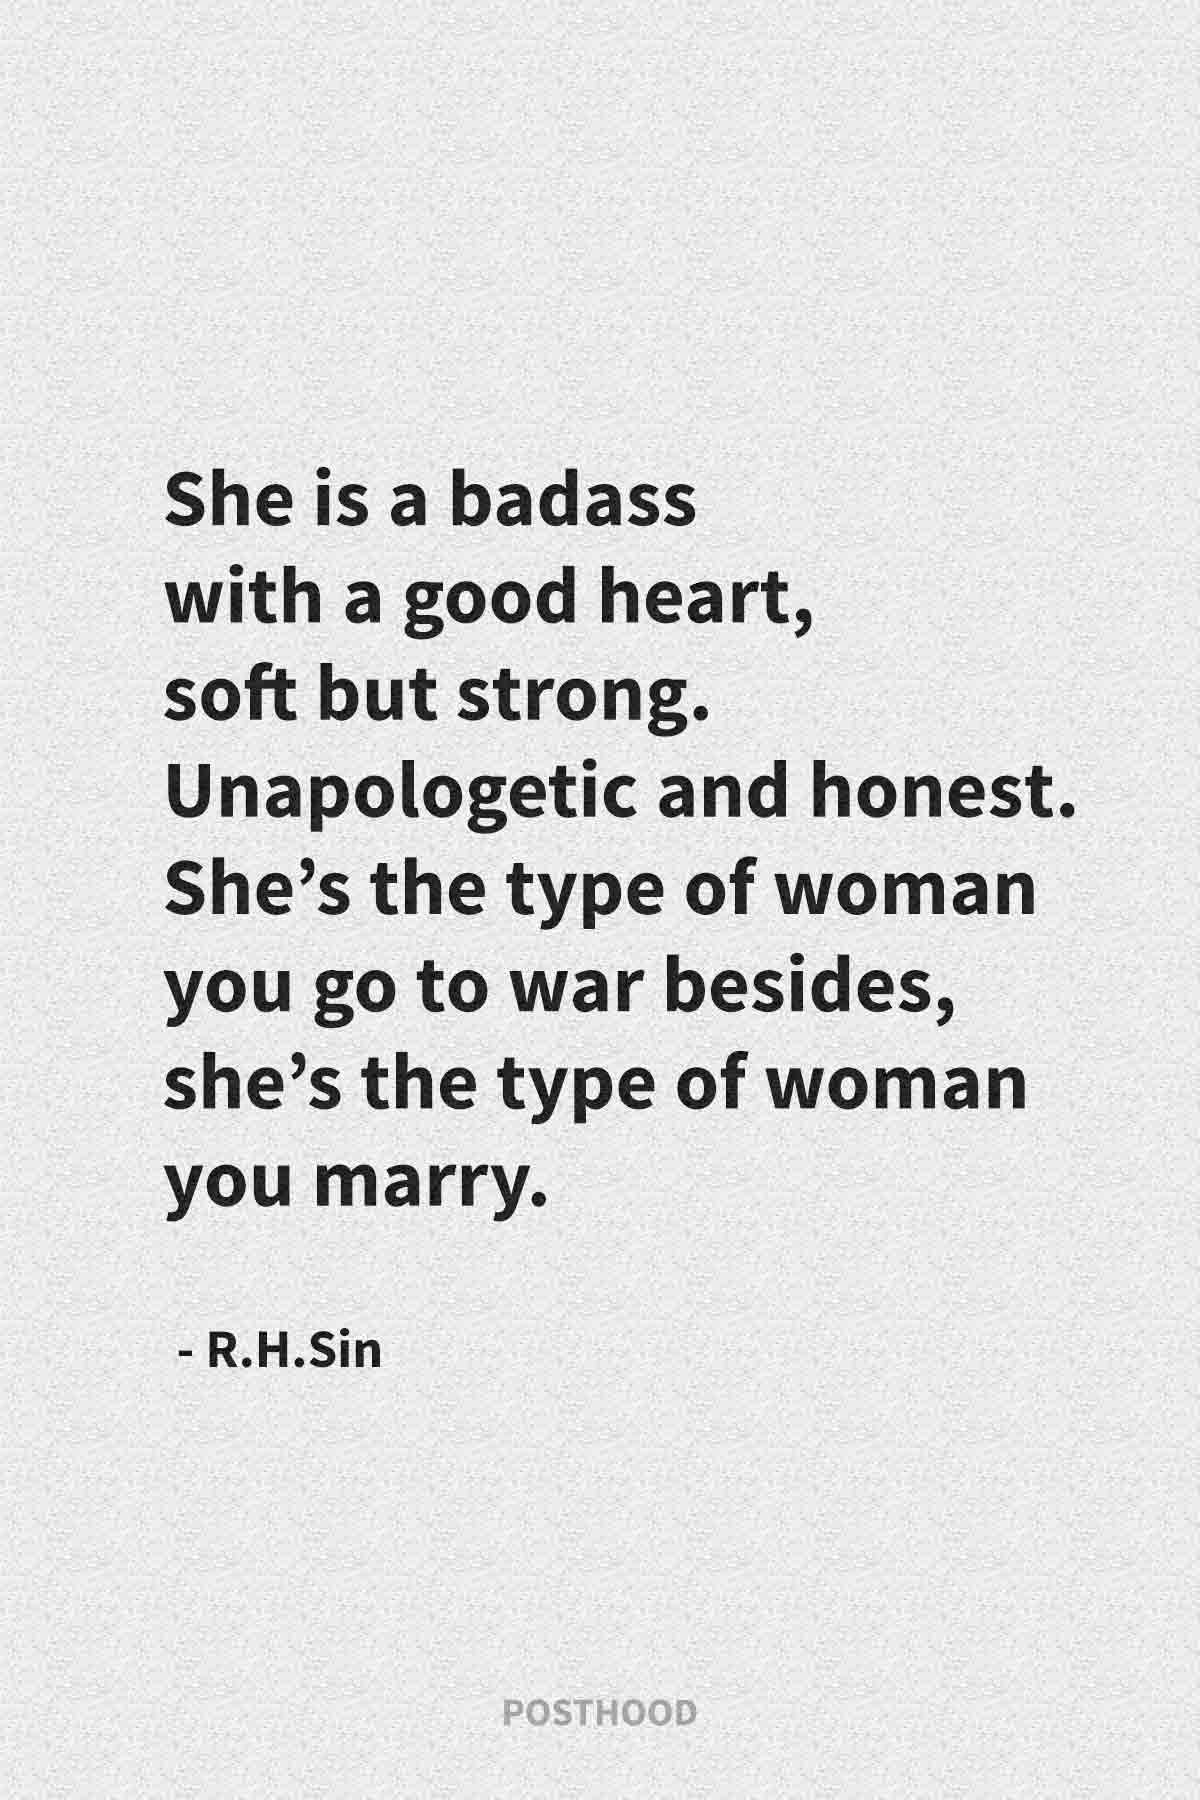 40 inspirational R.H.Sin quotes about strong women. Get a badass attitude when they hurt you and leave you. Best quotes about move on. 